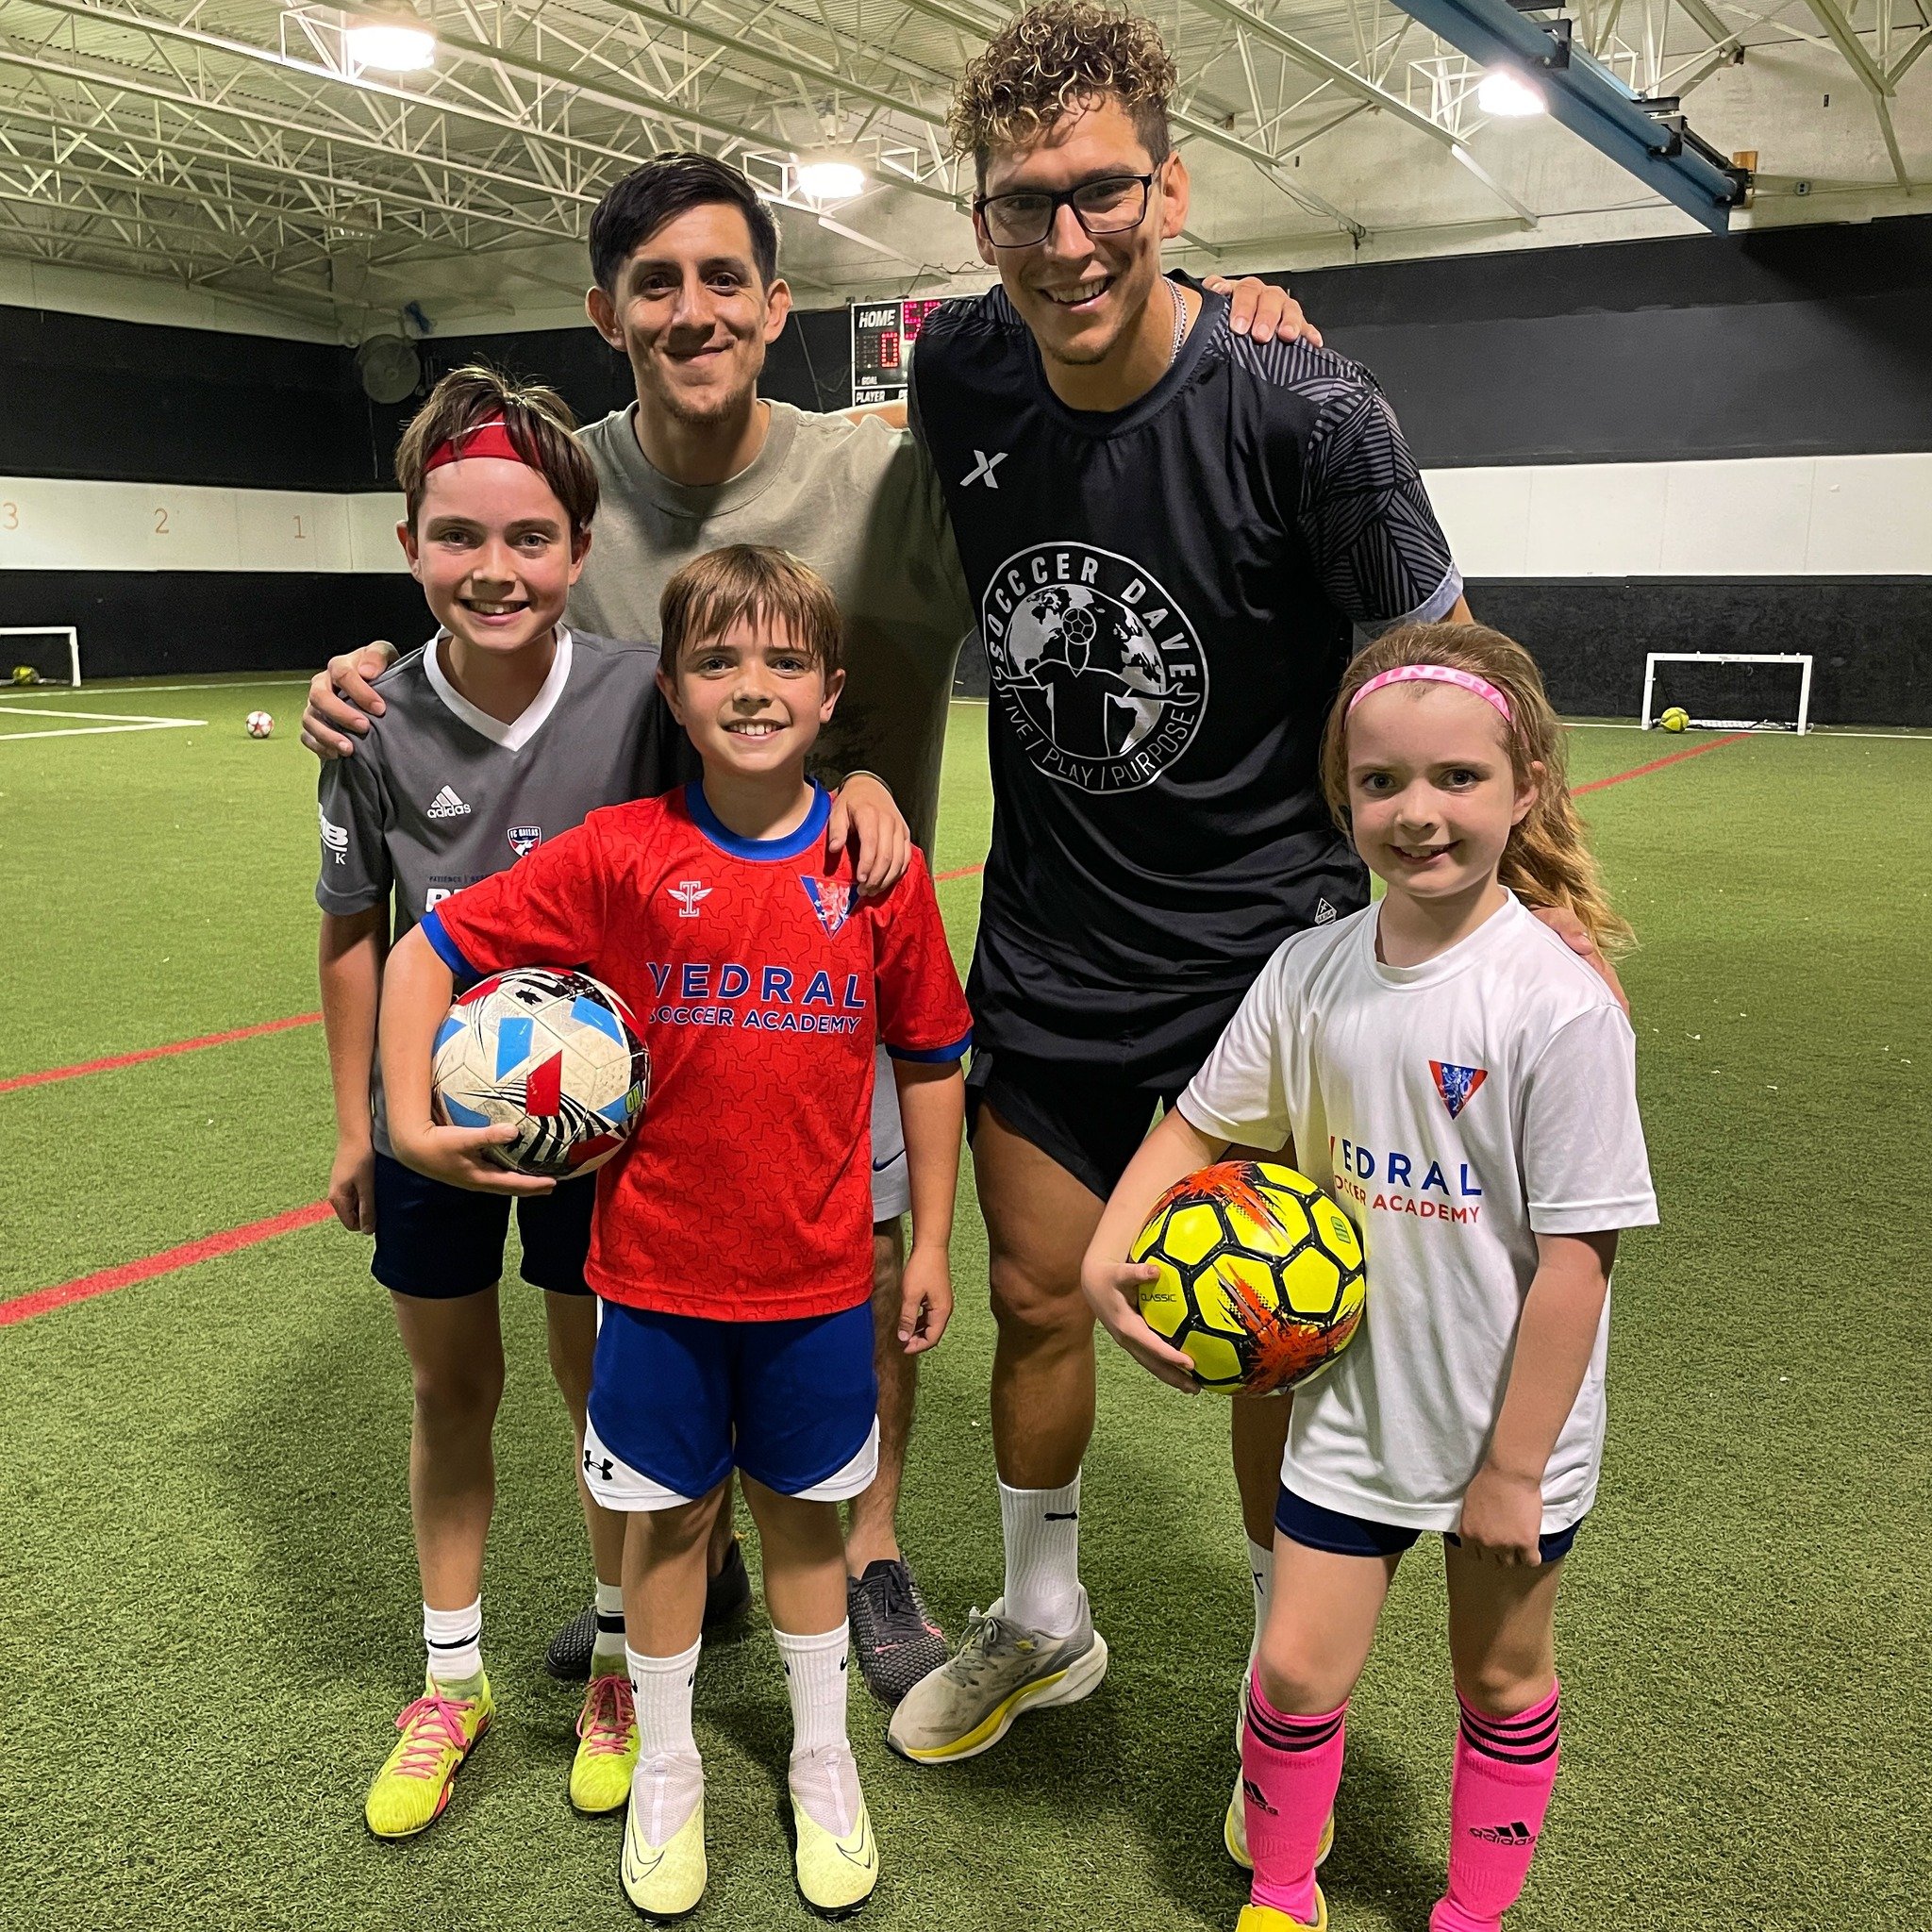 Training the Whitmire family

#vedralsocceracademy